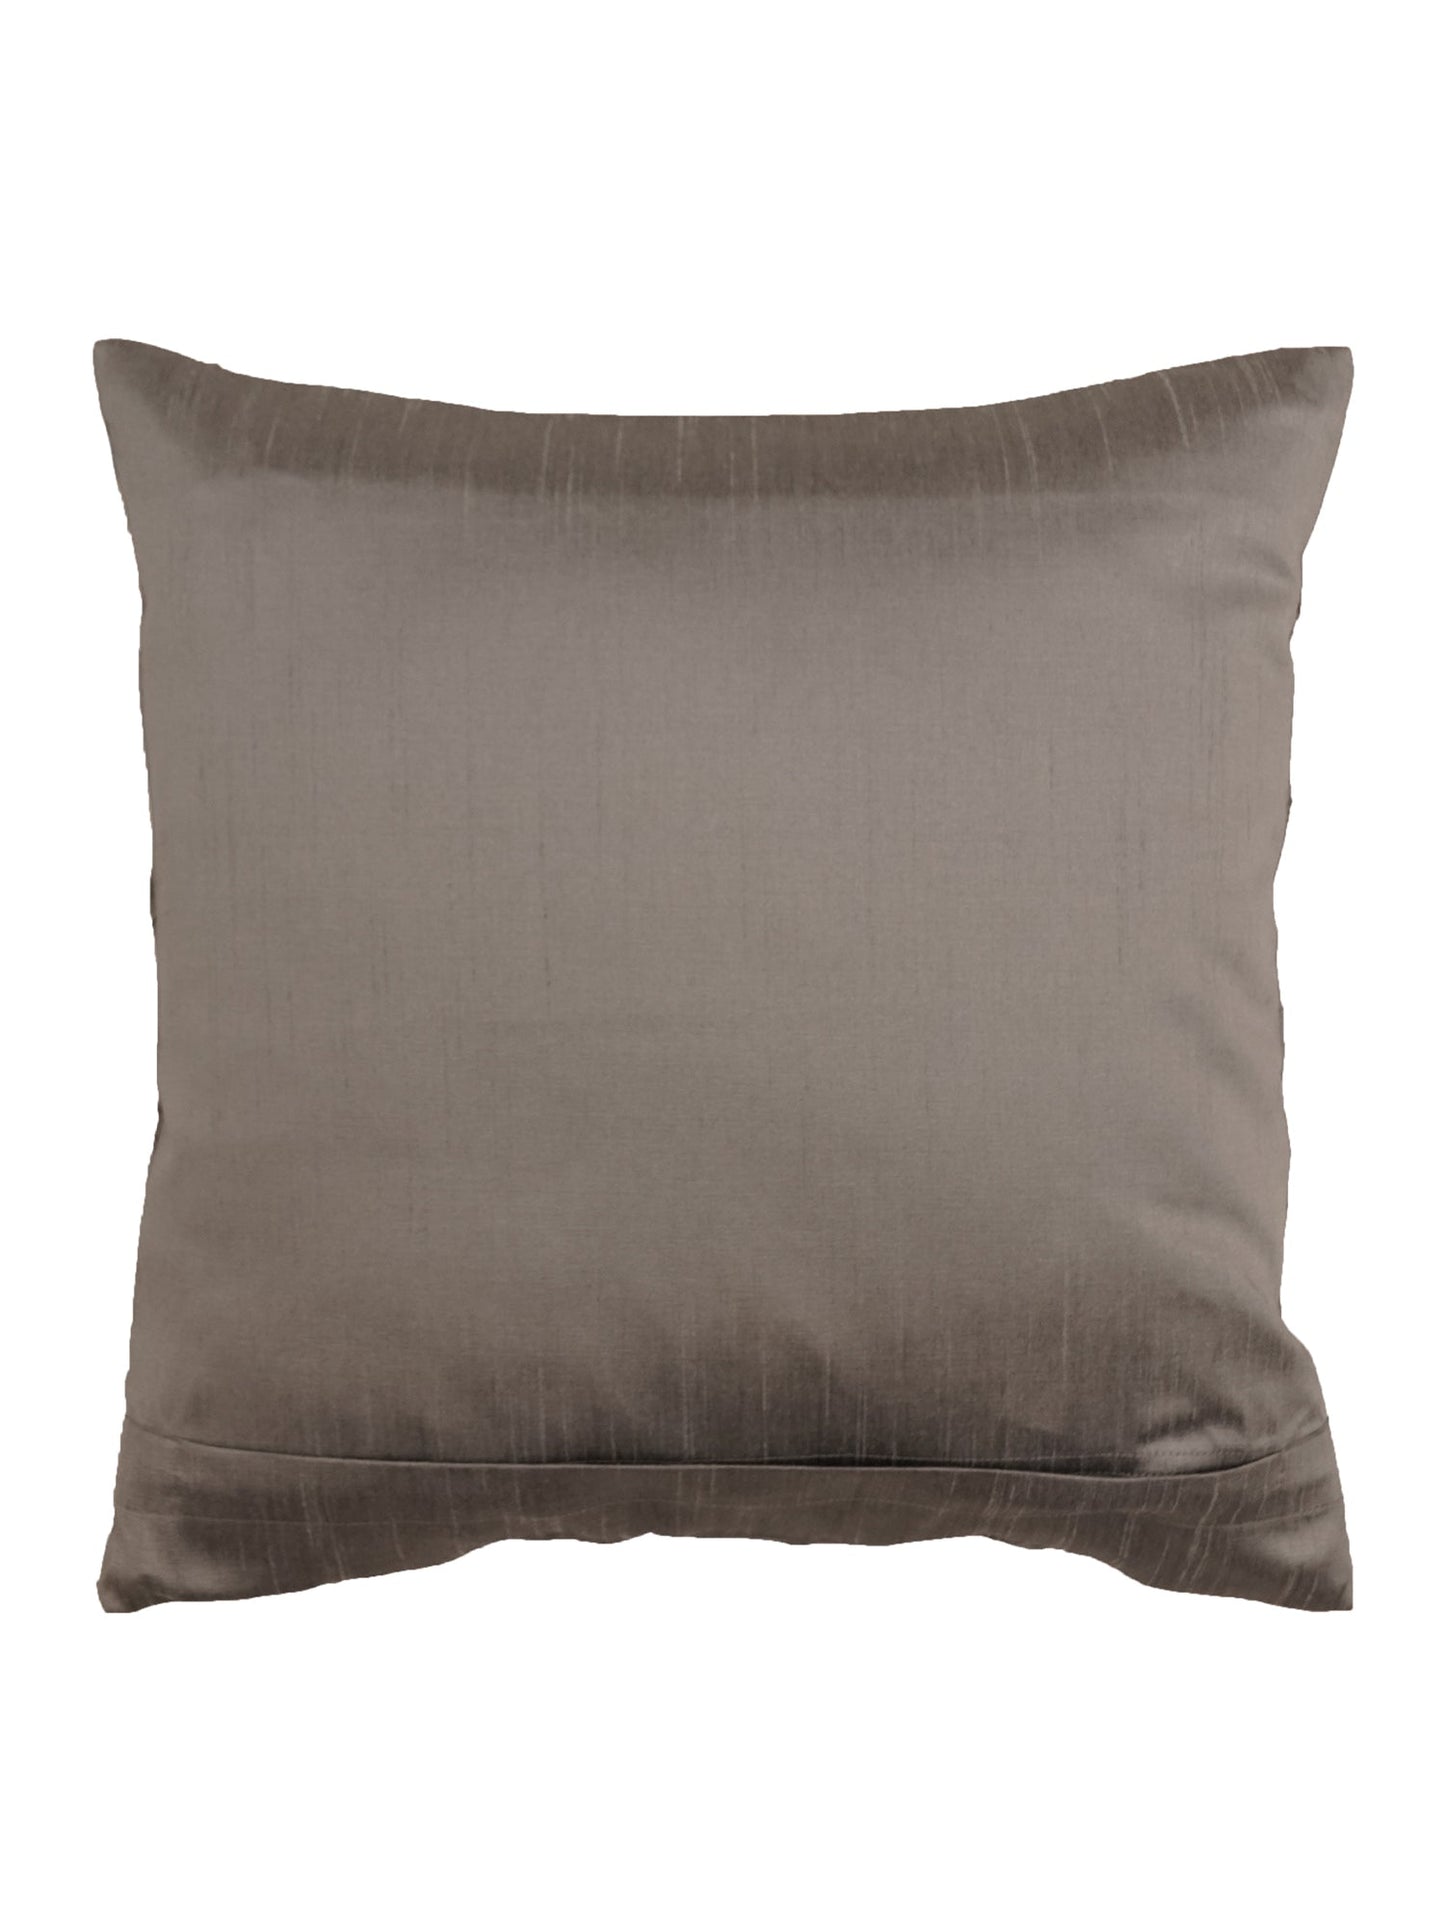 Technique Cushion Cover Polyester Shell Pin Tuck Grey - 16" X 16"